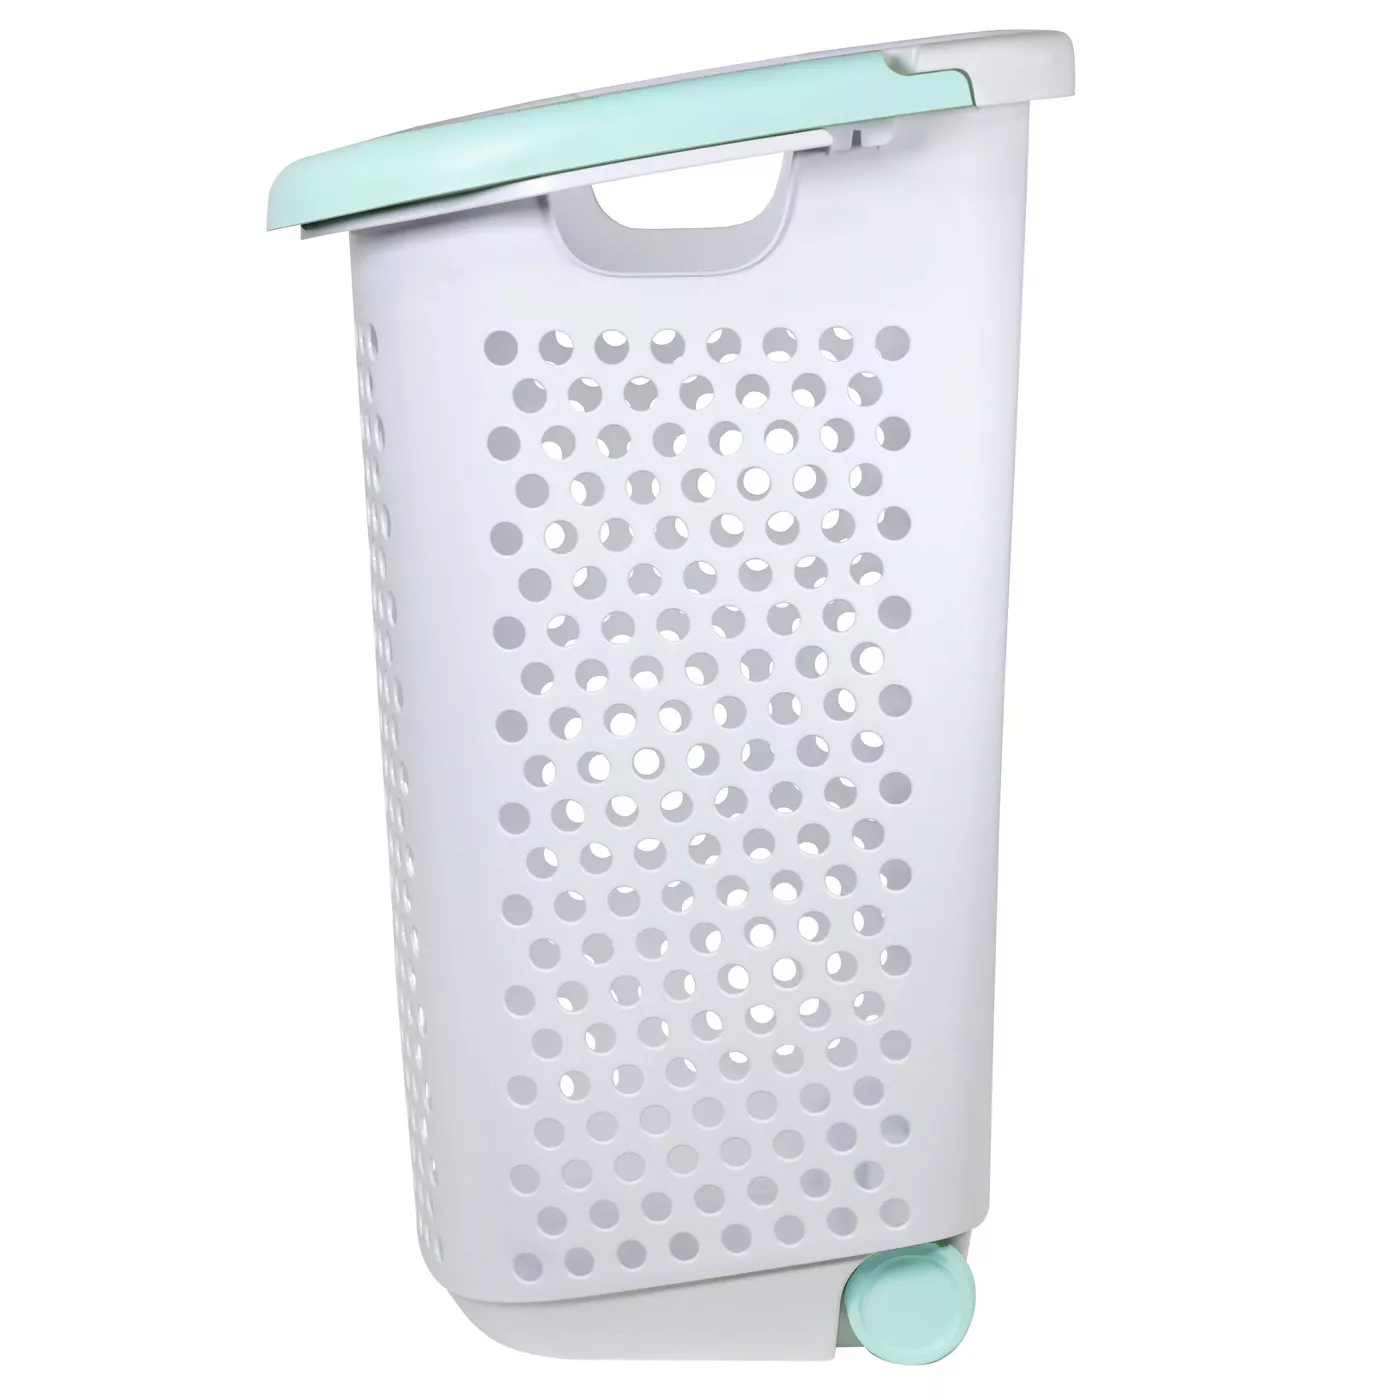 Rolling Laundry Hamper White With Turquoise Handles - Room Essentialsâ¢ - image 1 of 4